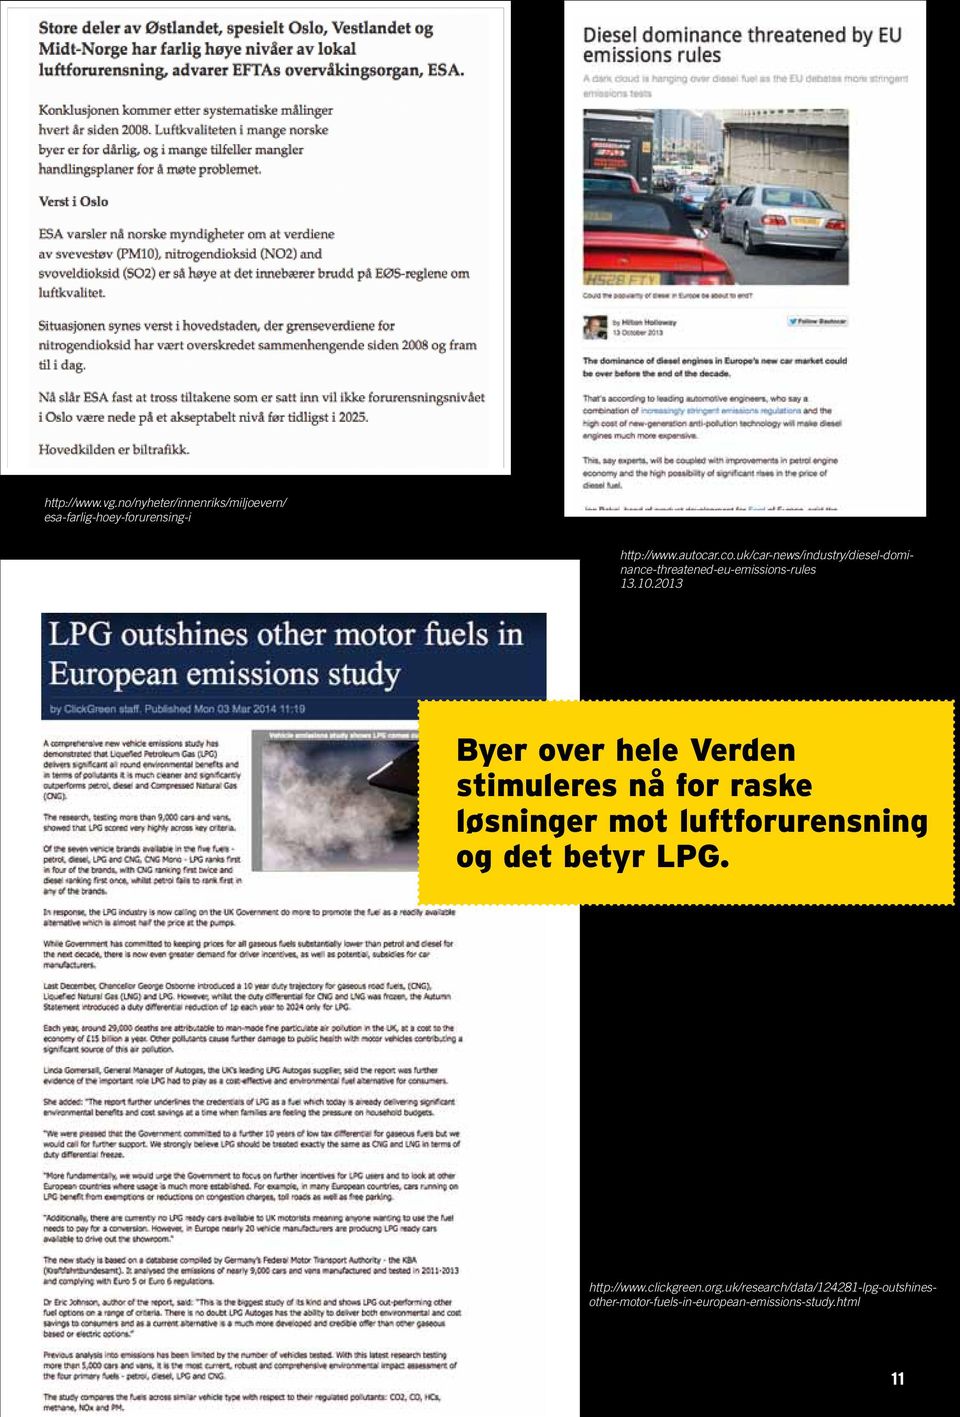 2014 16:03 http://www.autocar.co.uk/car-news/industry/diesel-dominance-threatened-eu-emissions-rules 13.10.